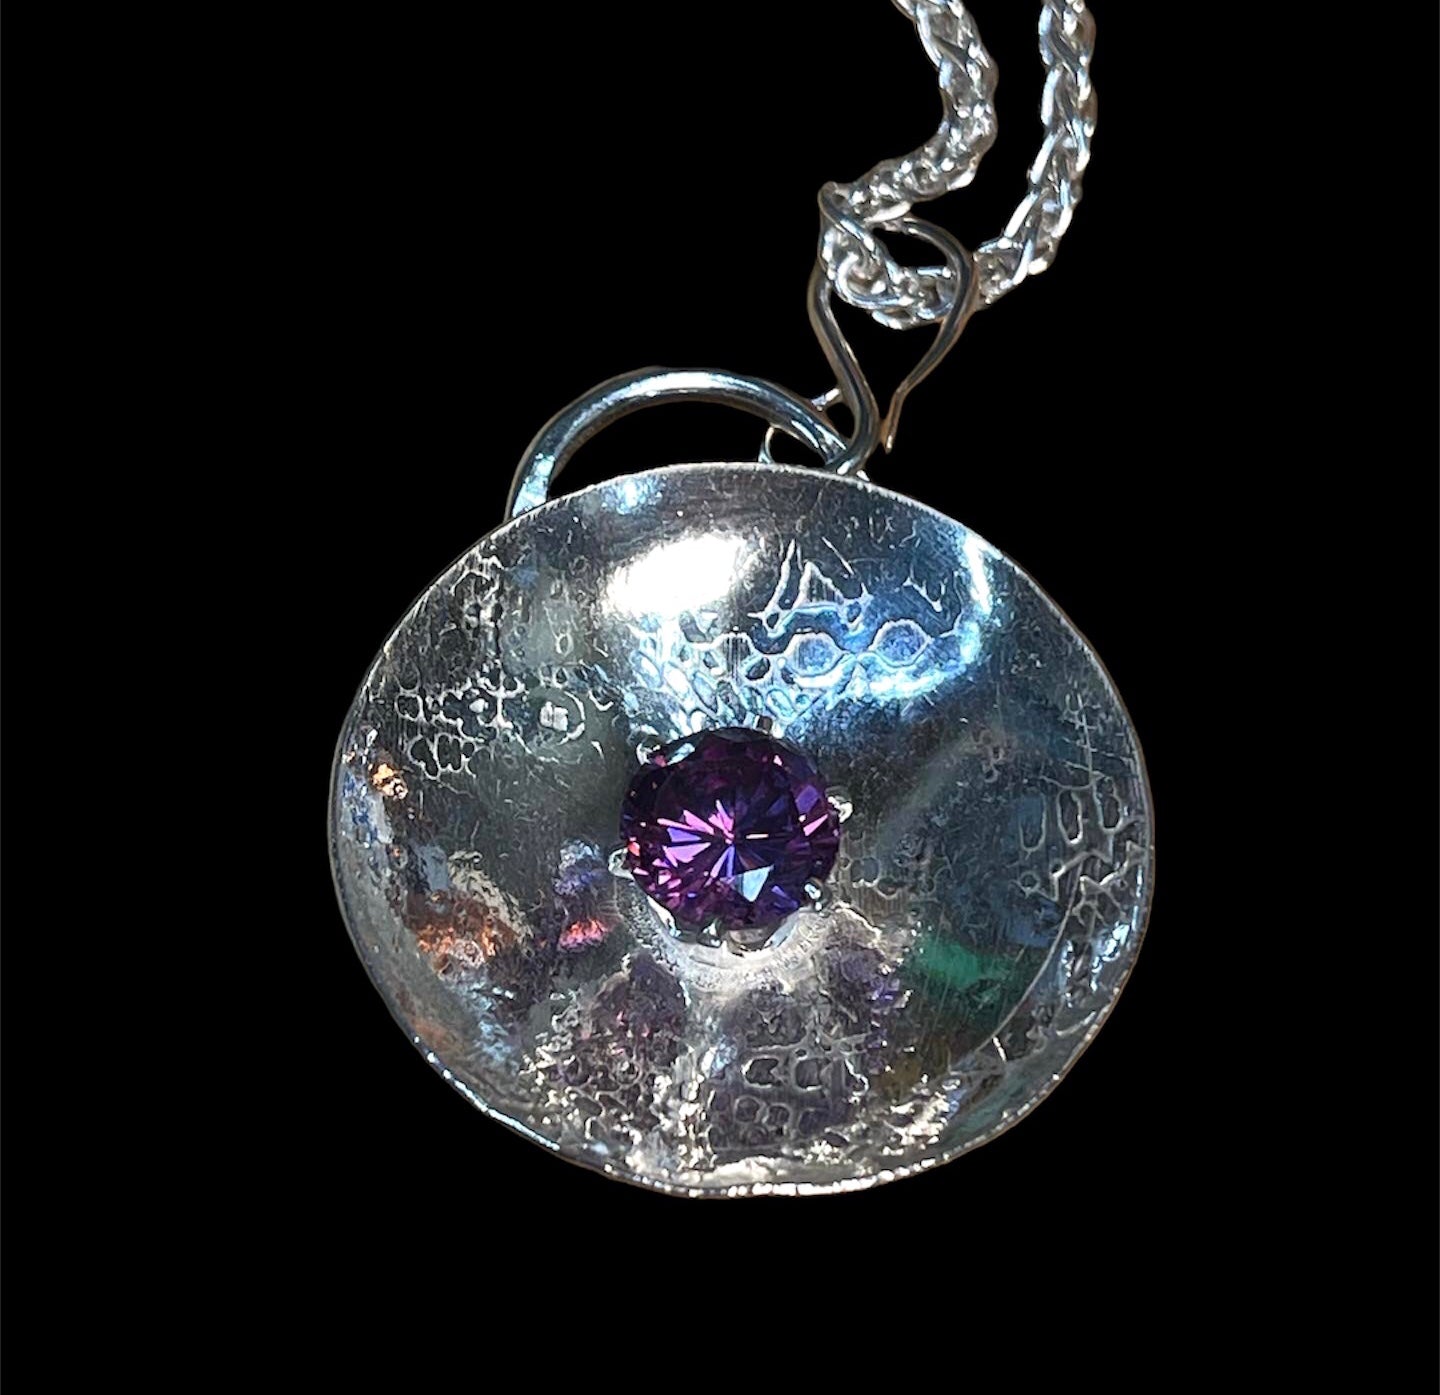 Silver orb necklace with amethyst